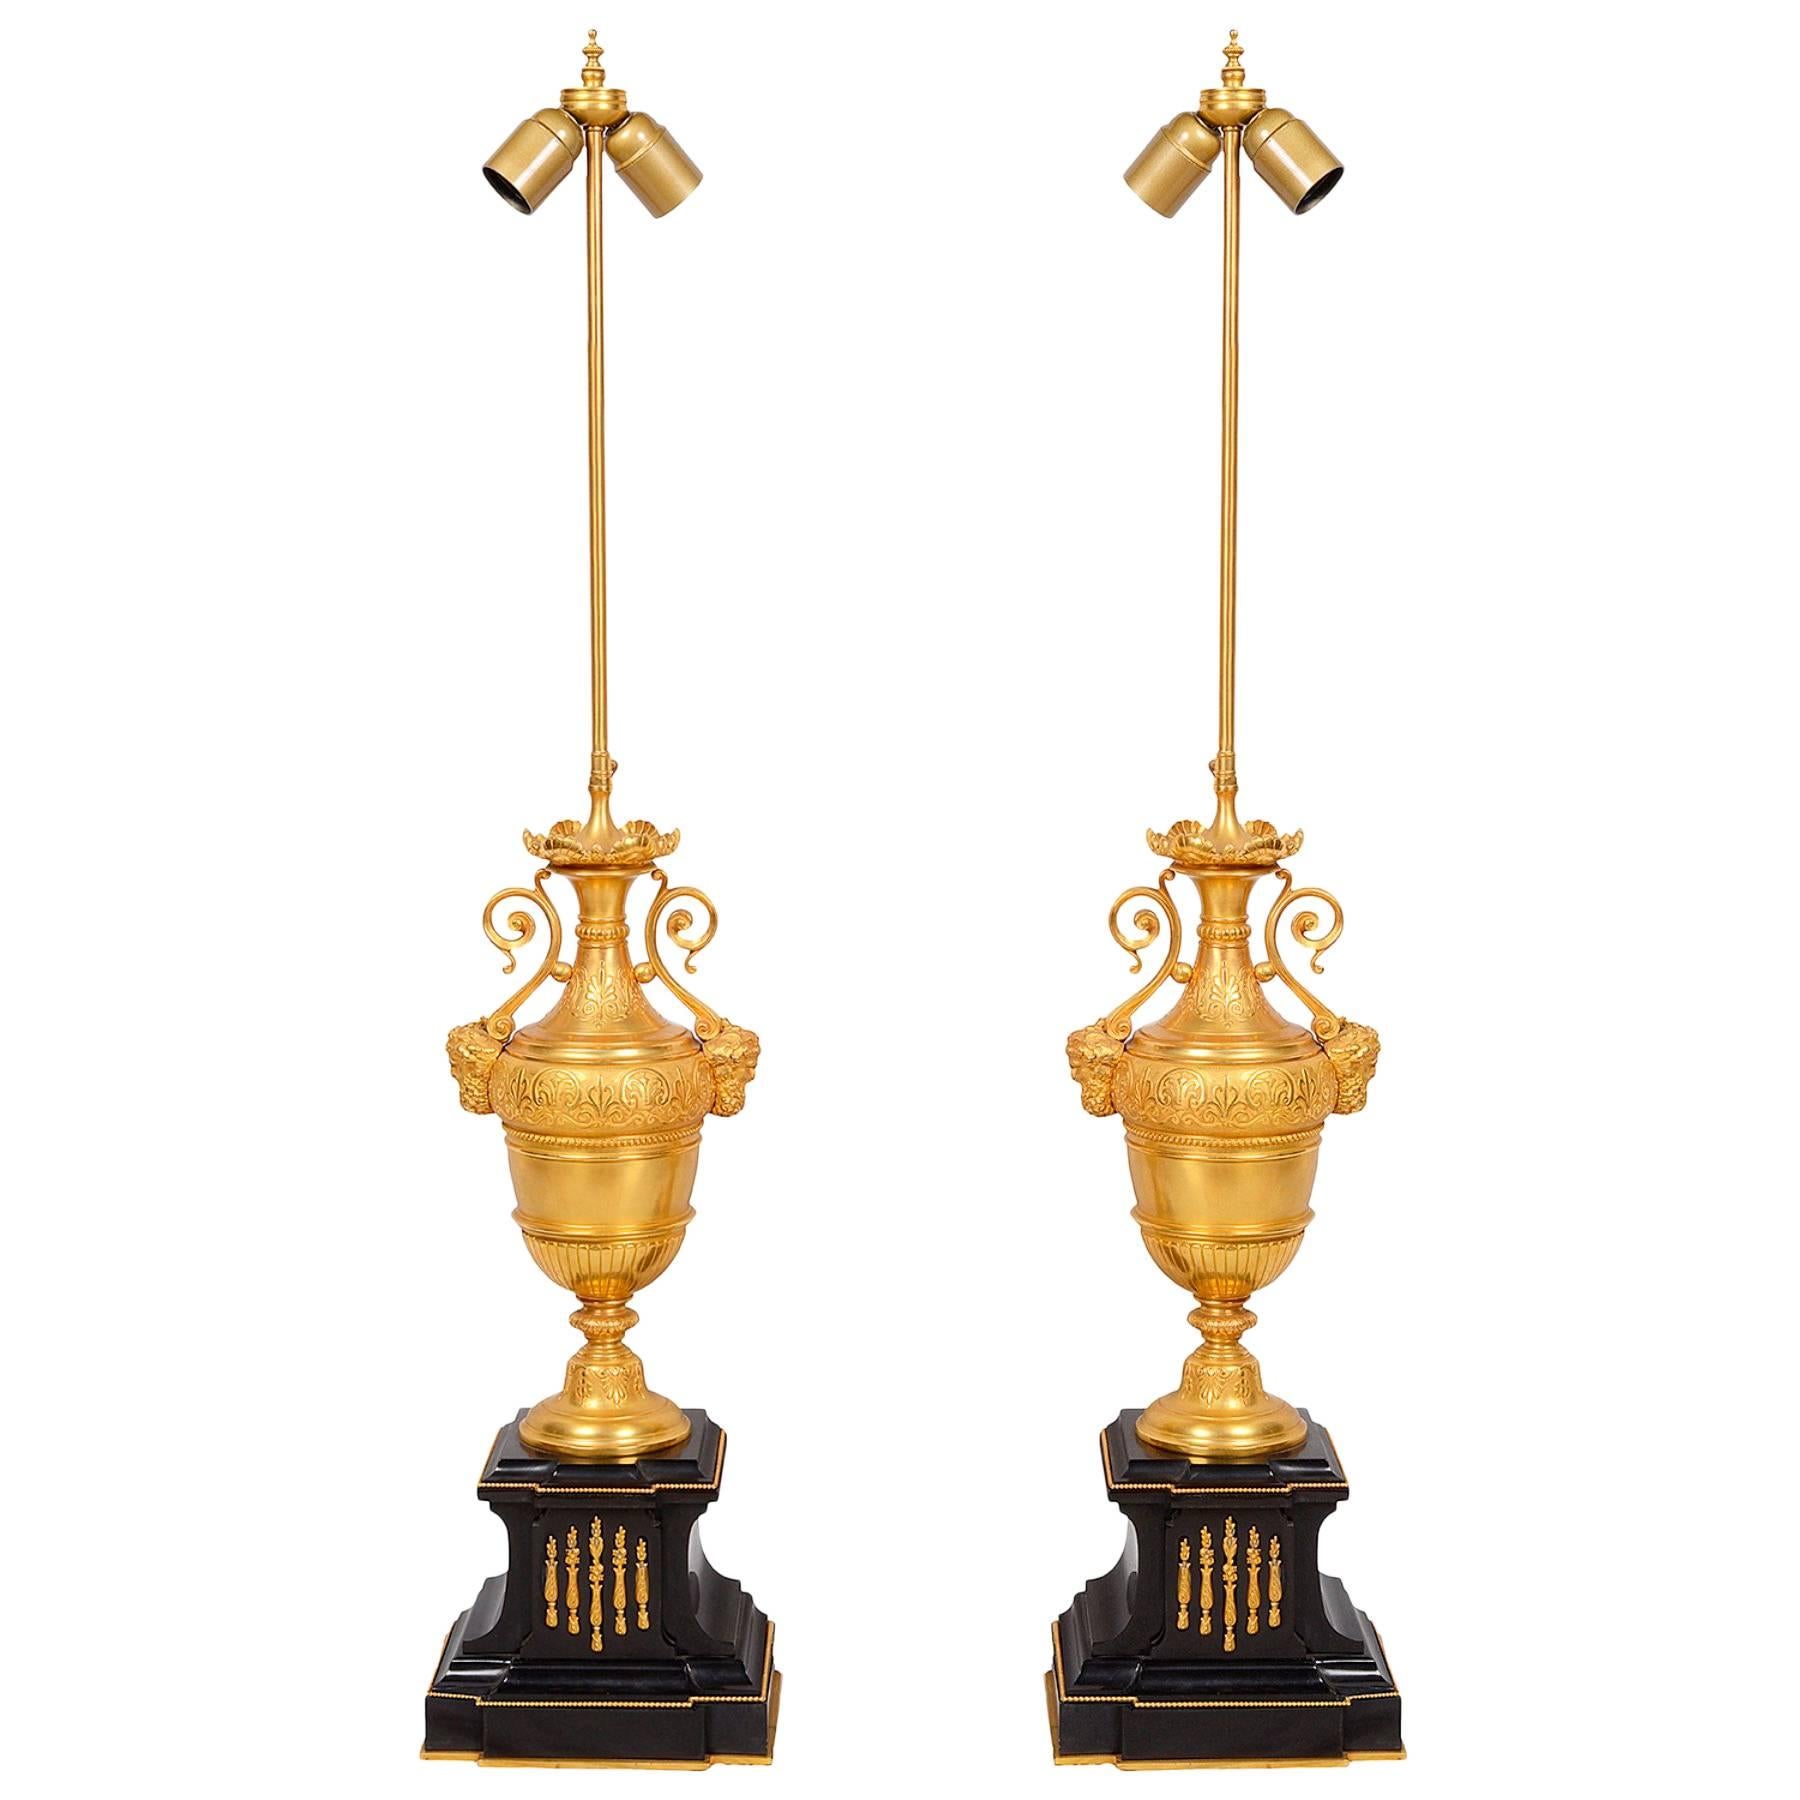 A pair of classical gilded ormolu and marble urn lamps, each with scrolling handles and bearded mask mounts.